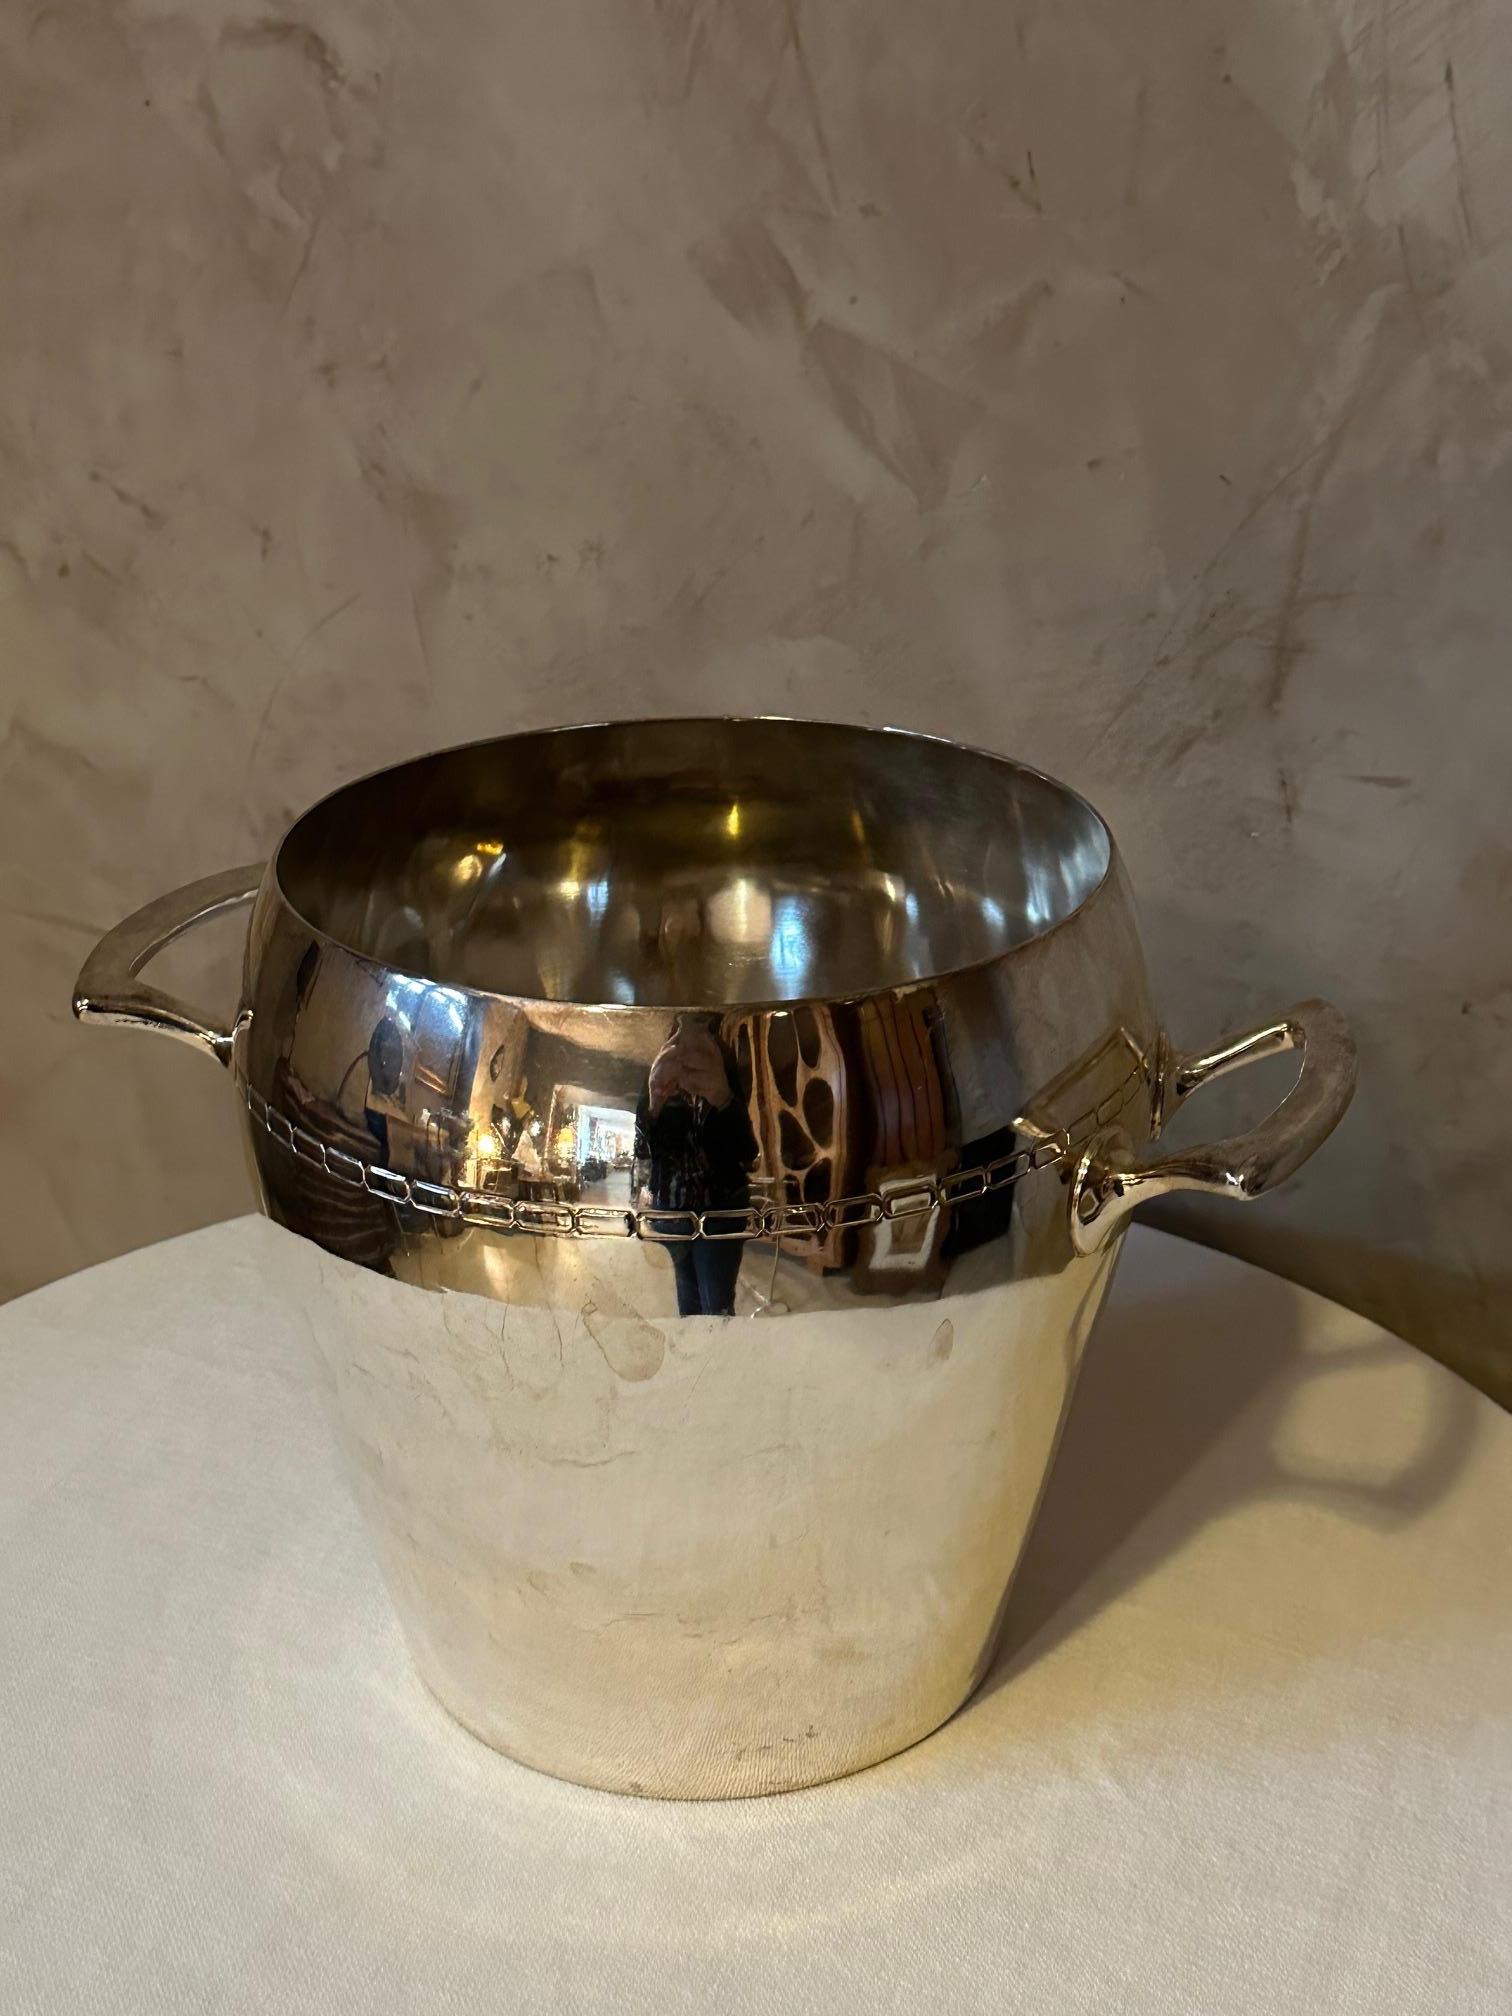 20th century French Art Deco Silver Plated Jeroboam Bucket For Sale 1